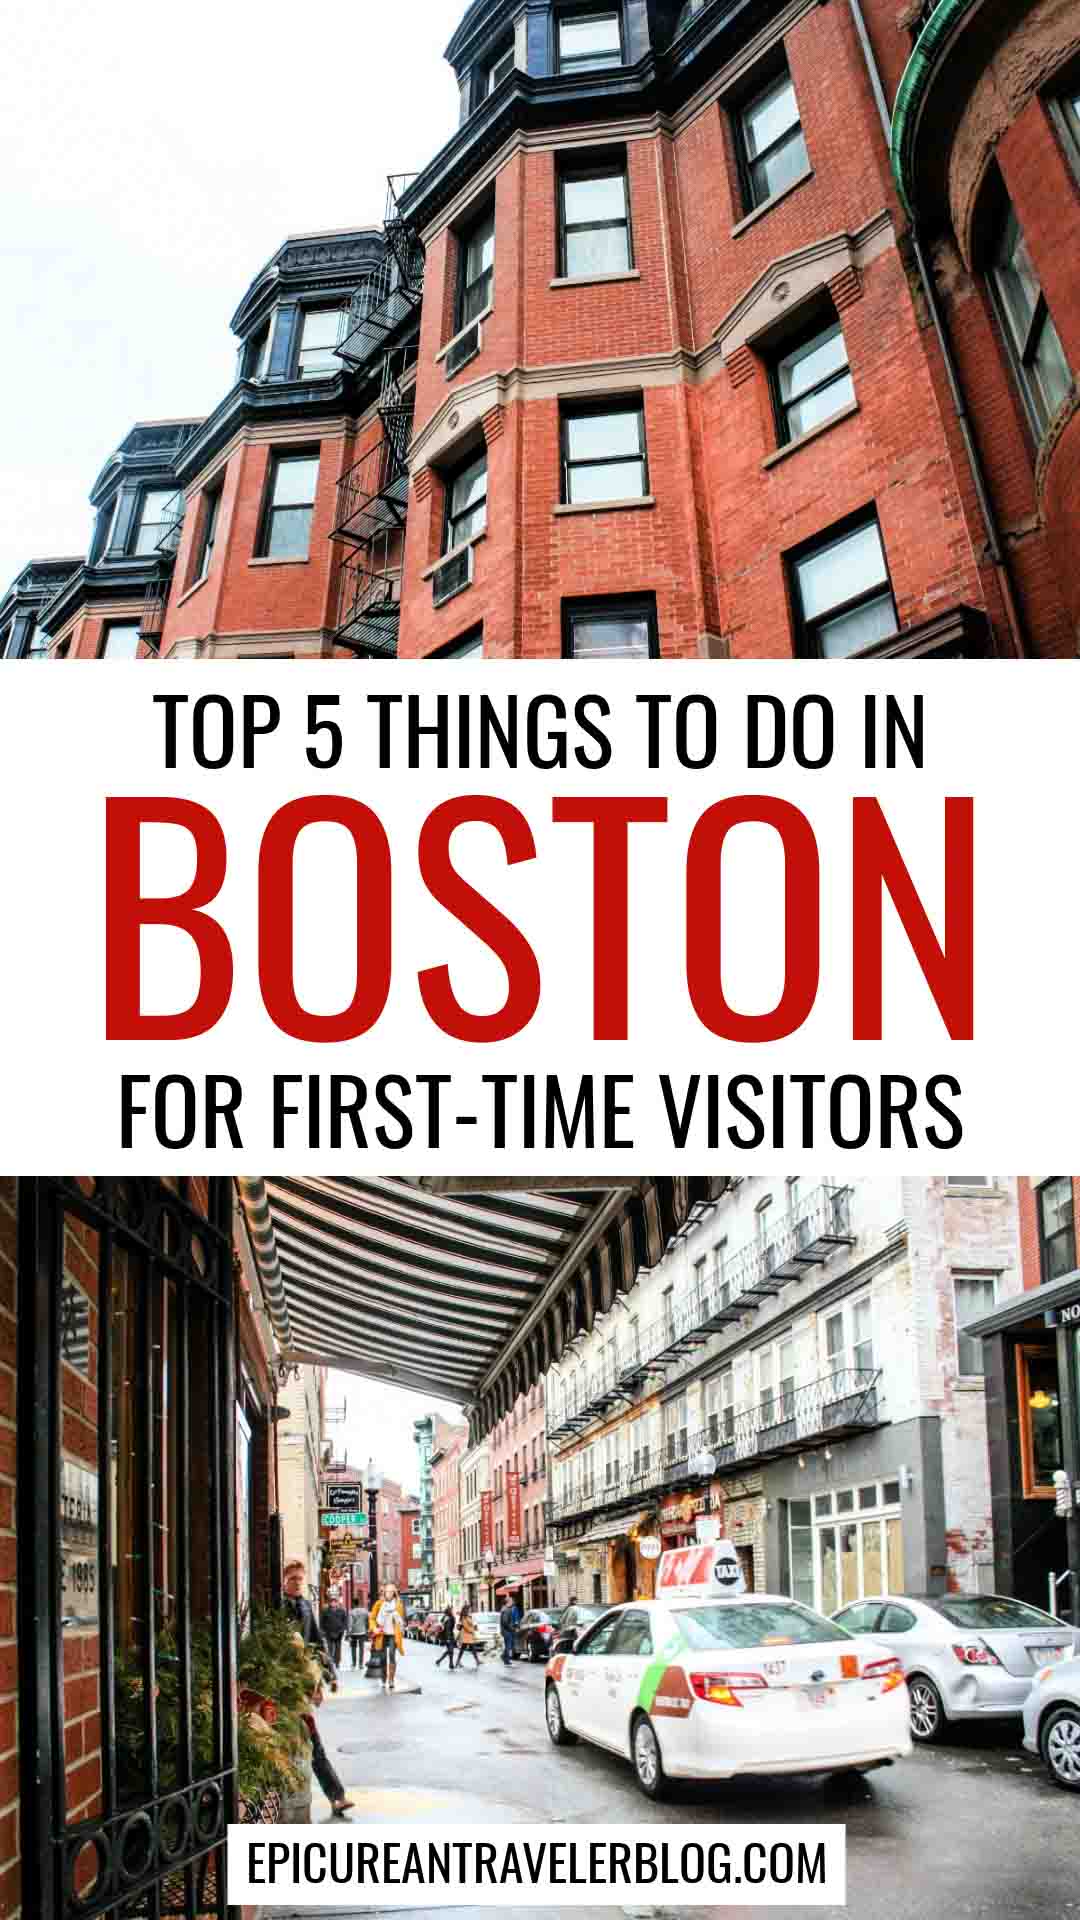 Top 5 Things to Do in Boston for First-Time Visitors